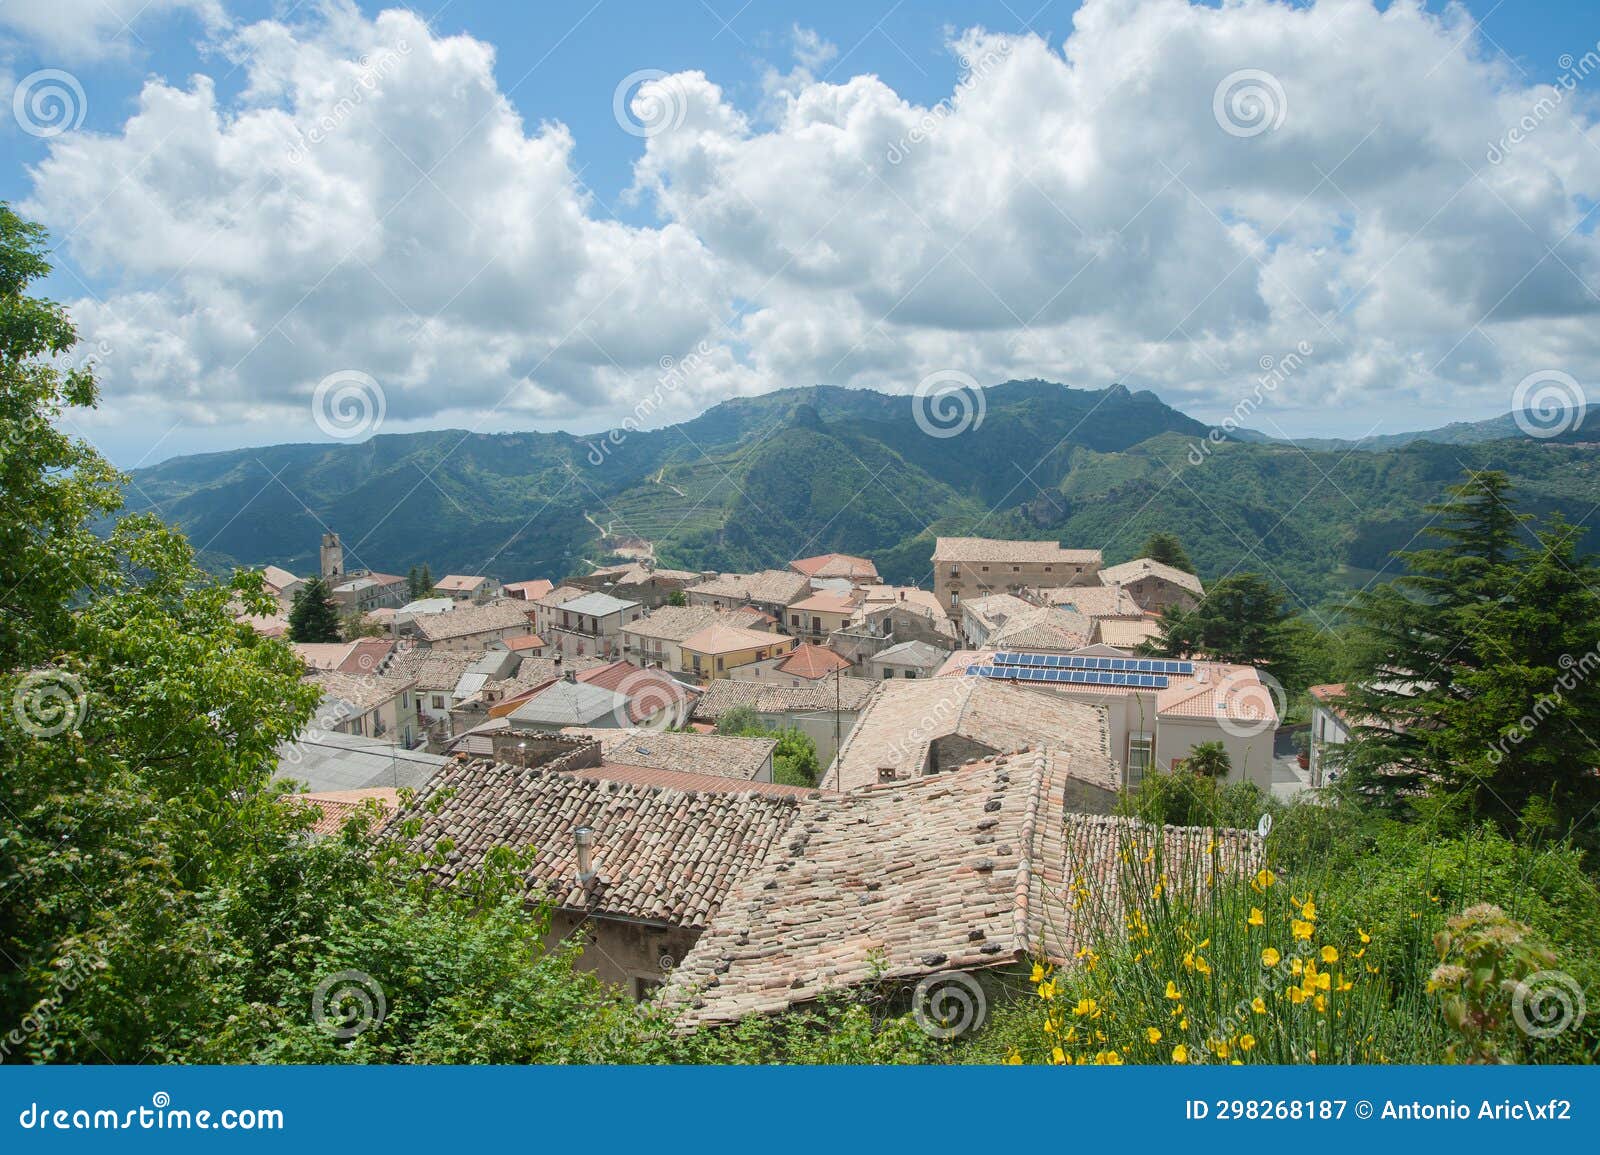 panoramic view of the village of aiello calabro